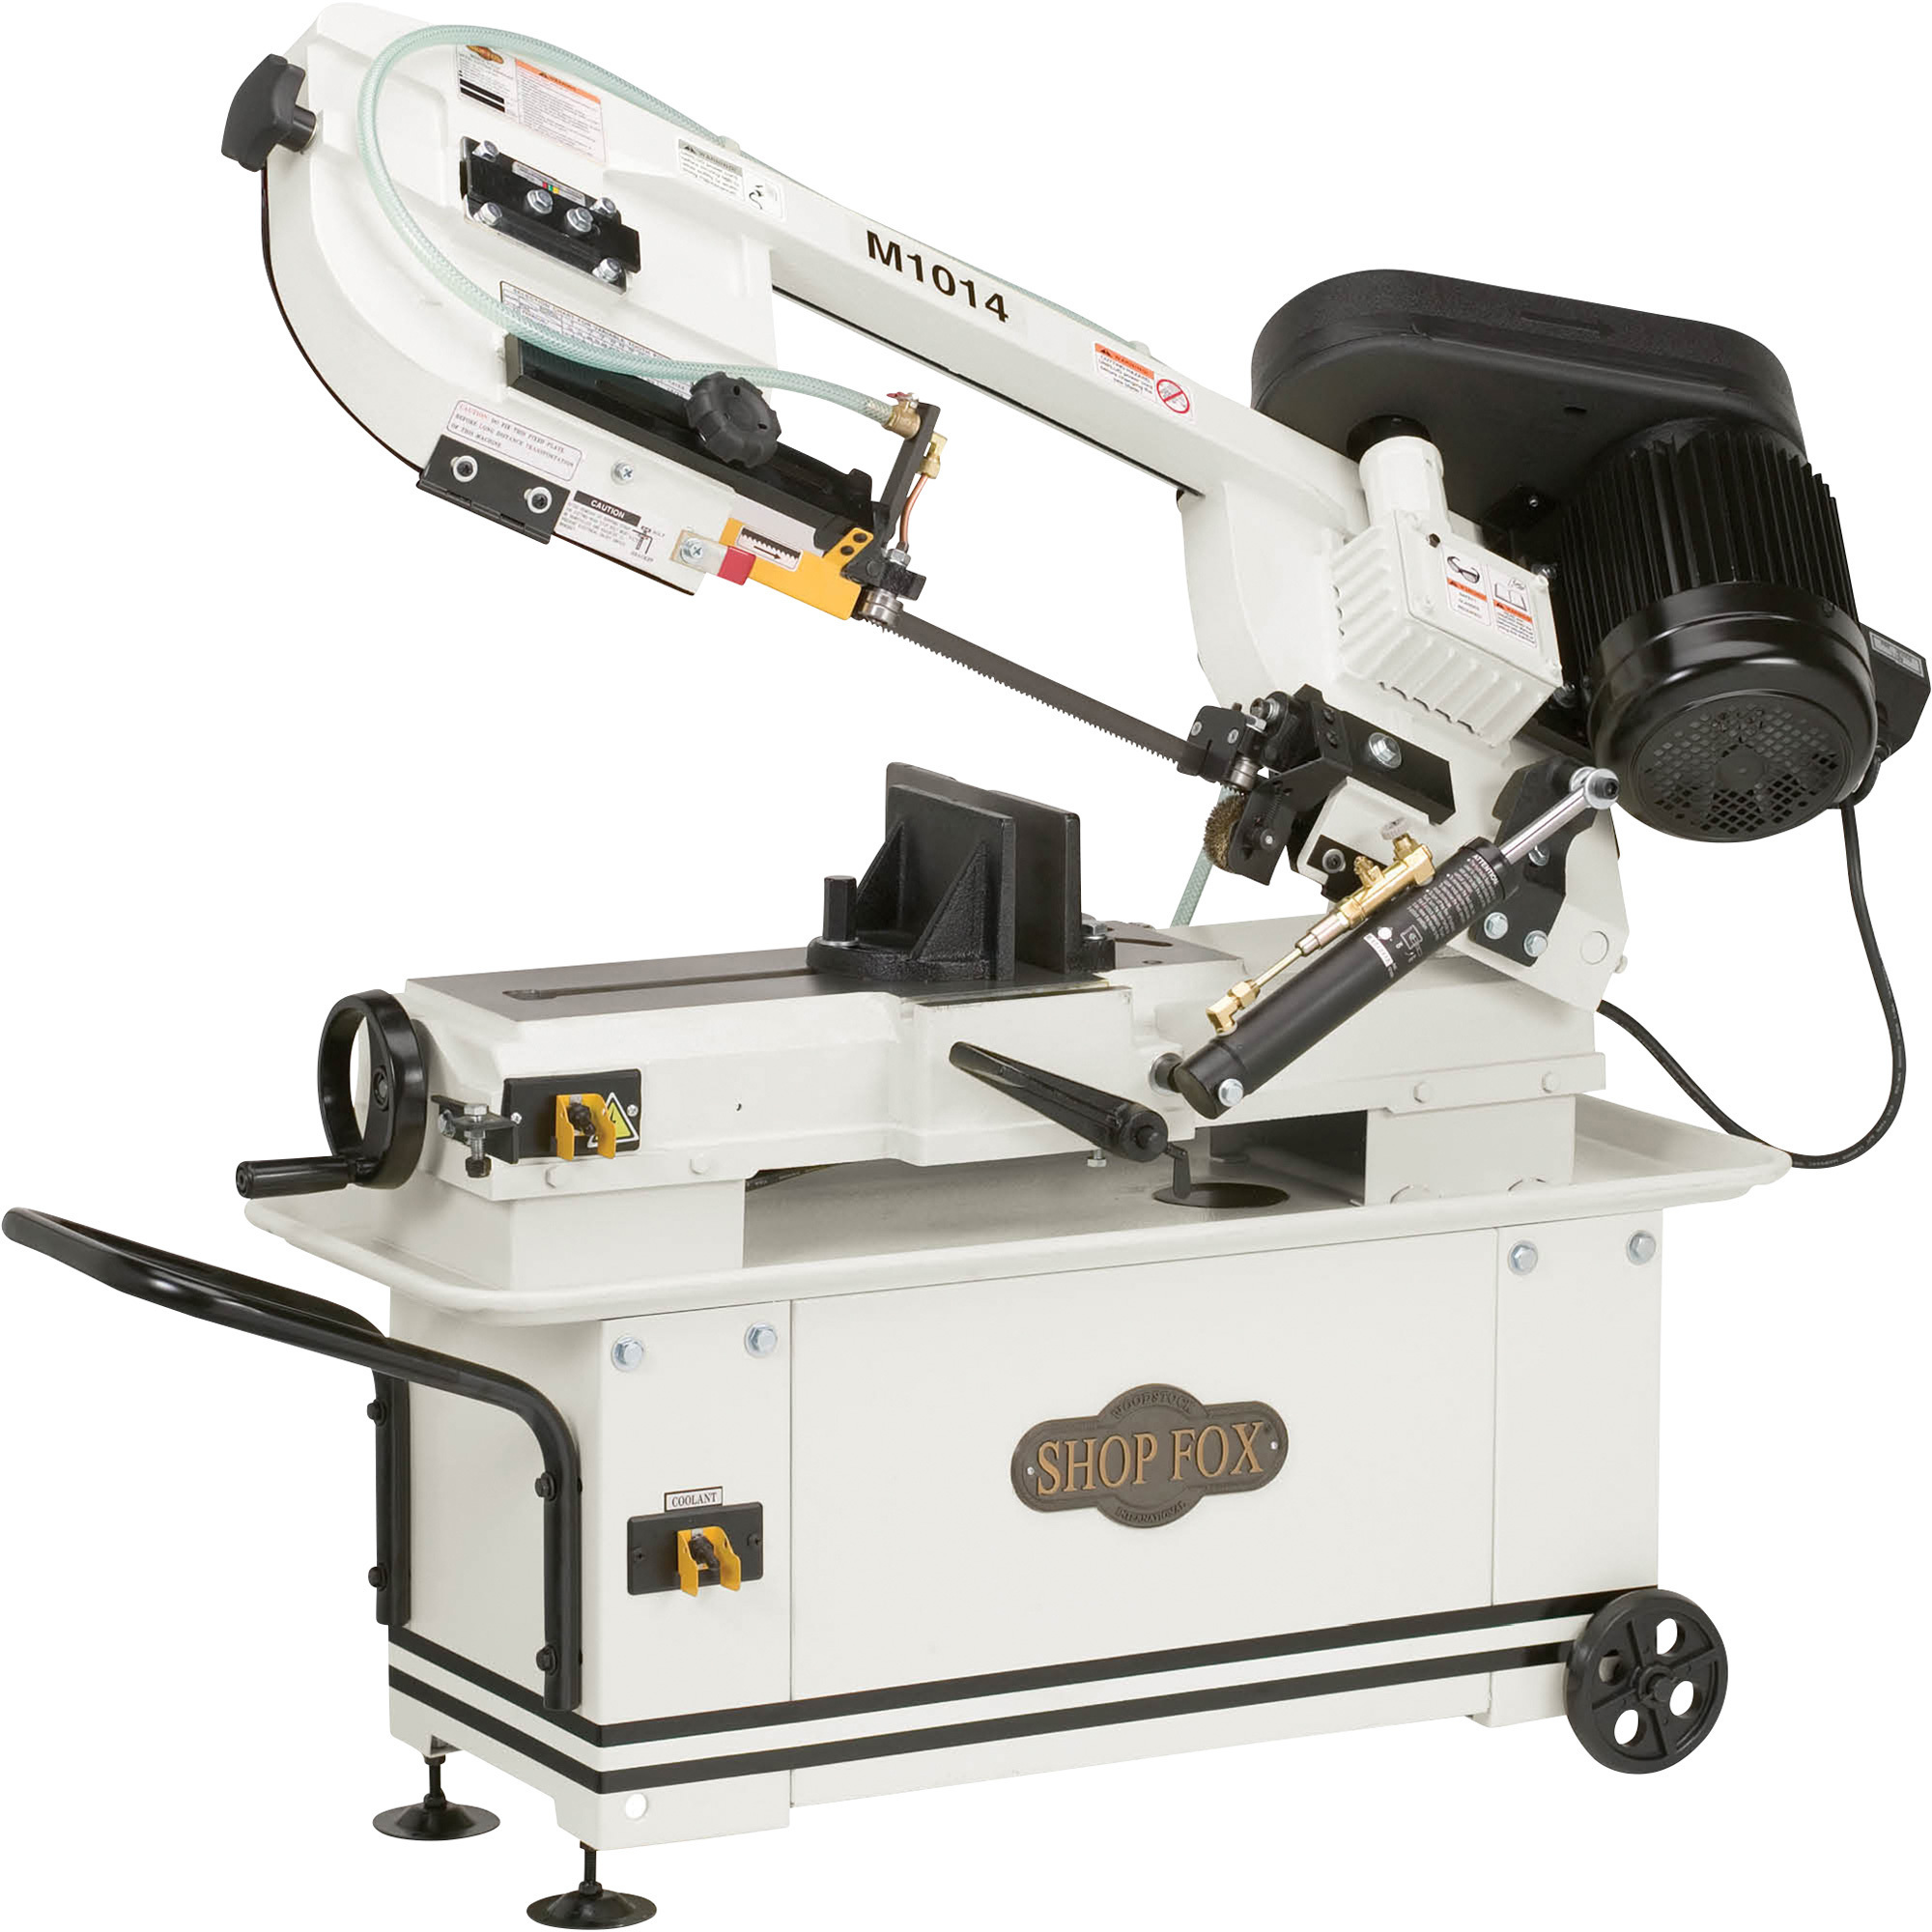 SHOP FOX Metal Cutting Band Saw — 7in. x 12in., HP, 110/240V, Model#  M1014 Northern Tool